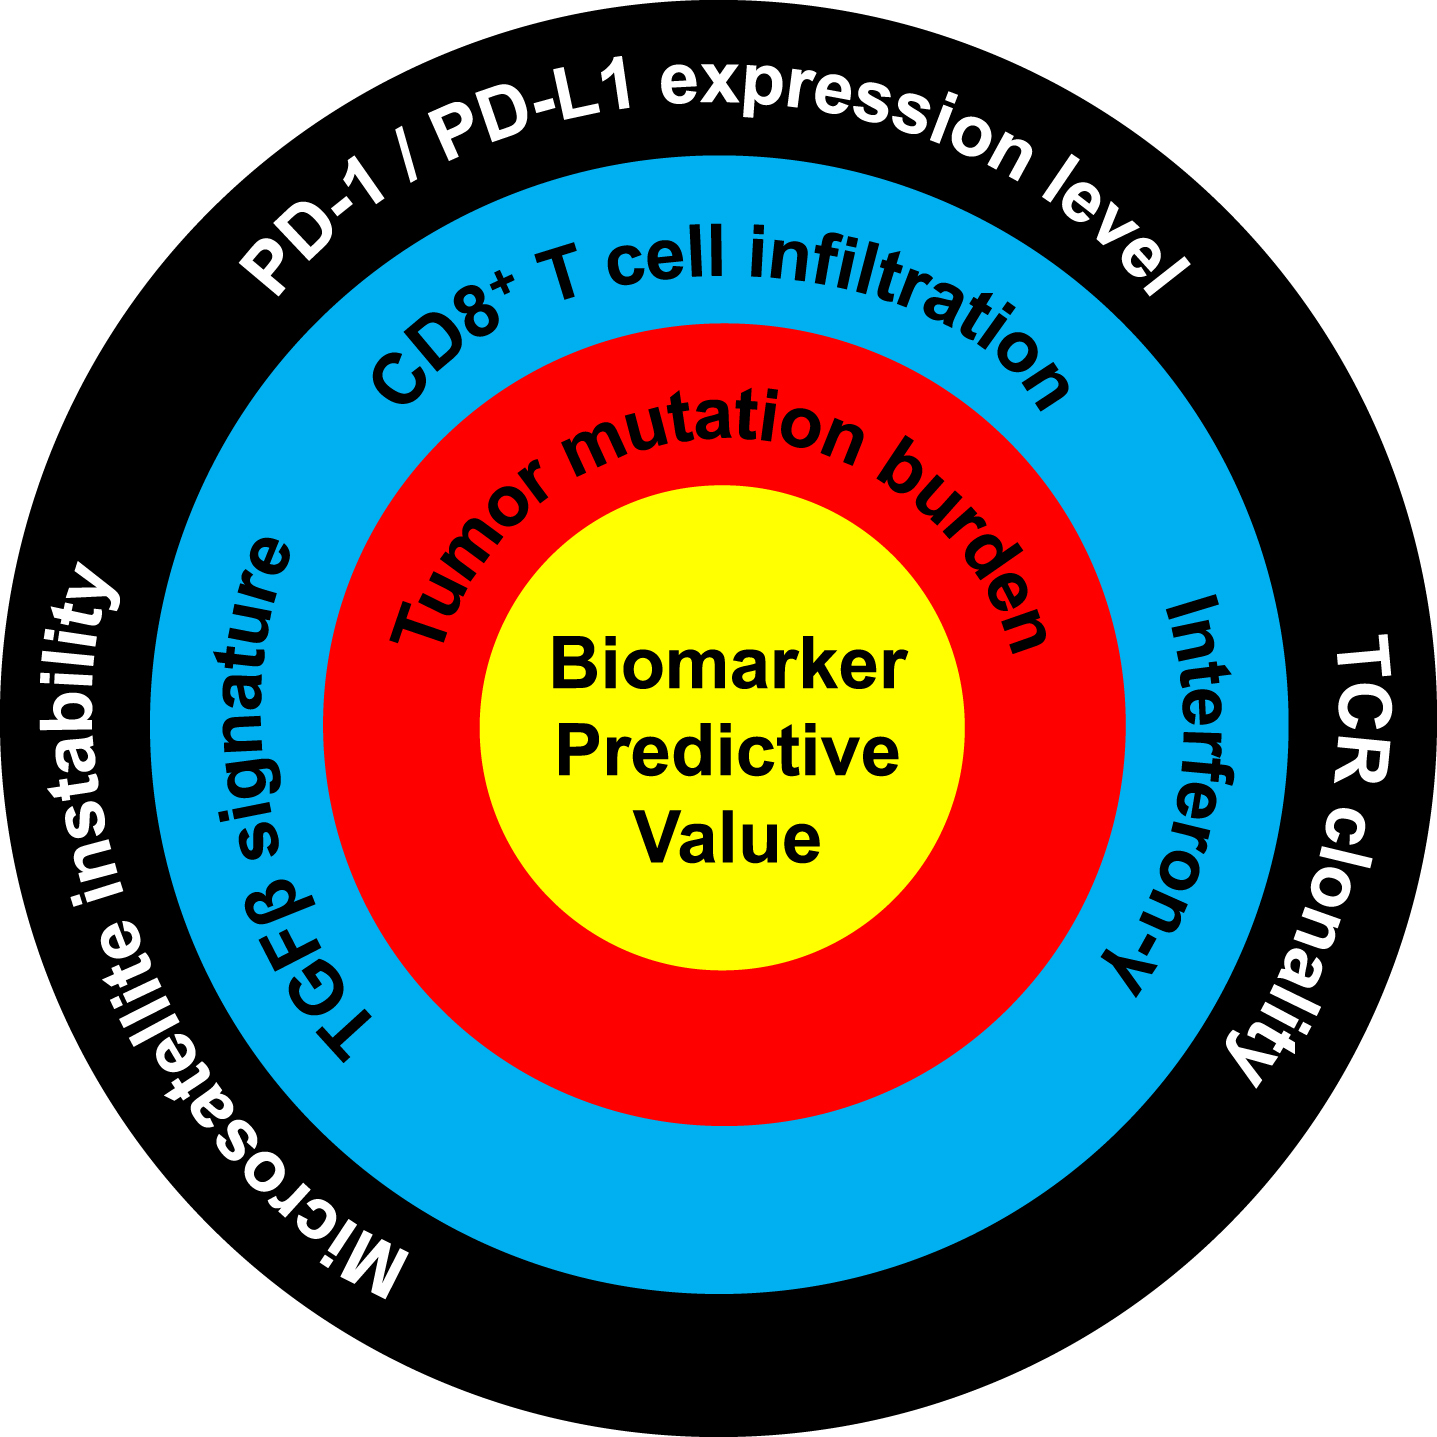 Ranking of the predictive value of molecular biomarkers for response to PD-1/PD-L1 immune checkpoint blockade. Biomarkers closer to the center are more predictive of response. High predictive value: tumor mutation burden. Moderate predictive value: TGFβ signature, CD8 T cell infiltration, interferon-γ. Low predictive value: microsatellite instability, PD-1/PD-L1 expression level, TCR clonality. Predictive level was assessed based on the amount of published data and the quality of these studies, as evaluated and determined in consensus by all authors.